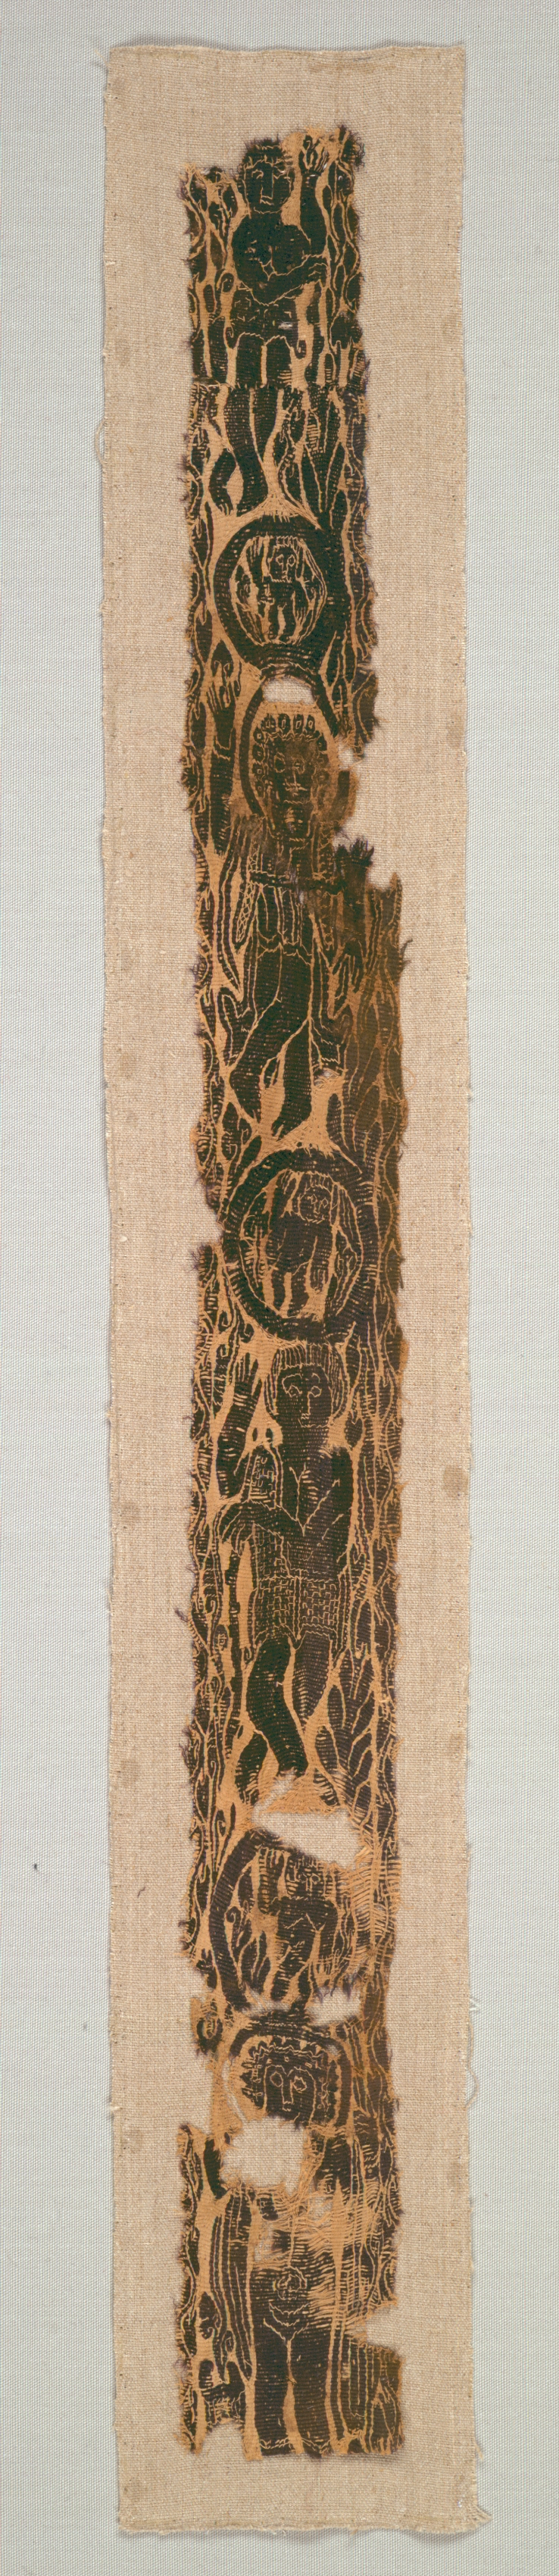 Ornamental Shoulder Band from a Tunic